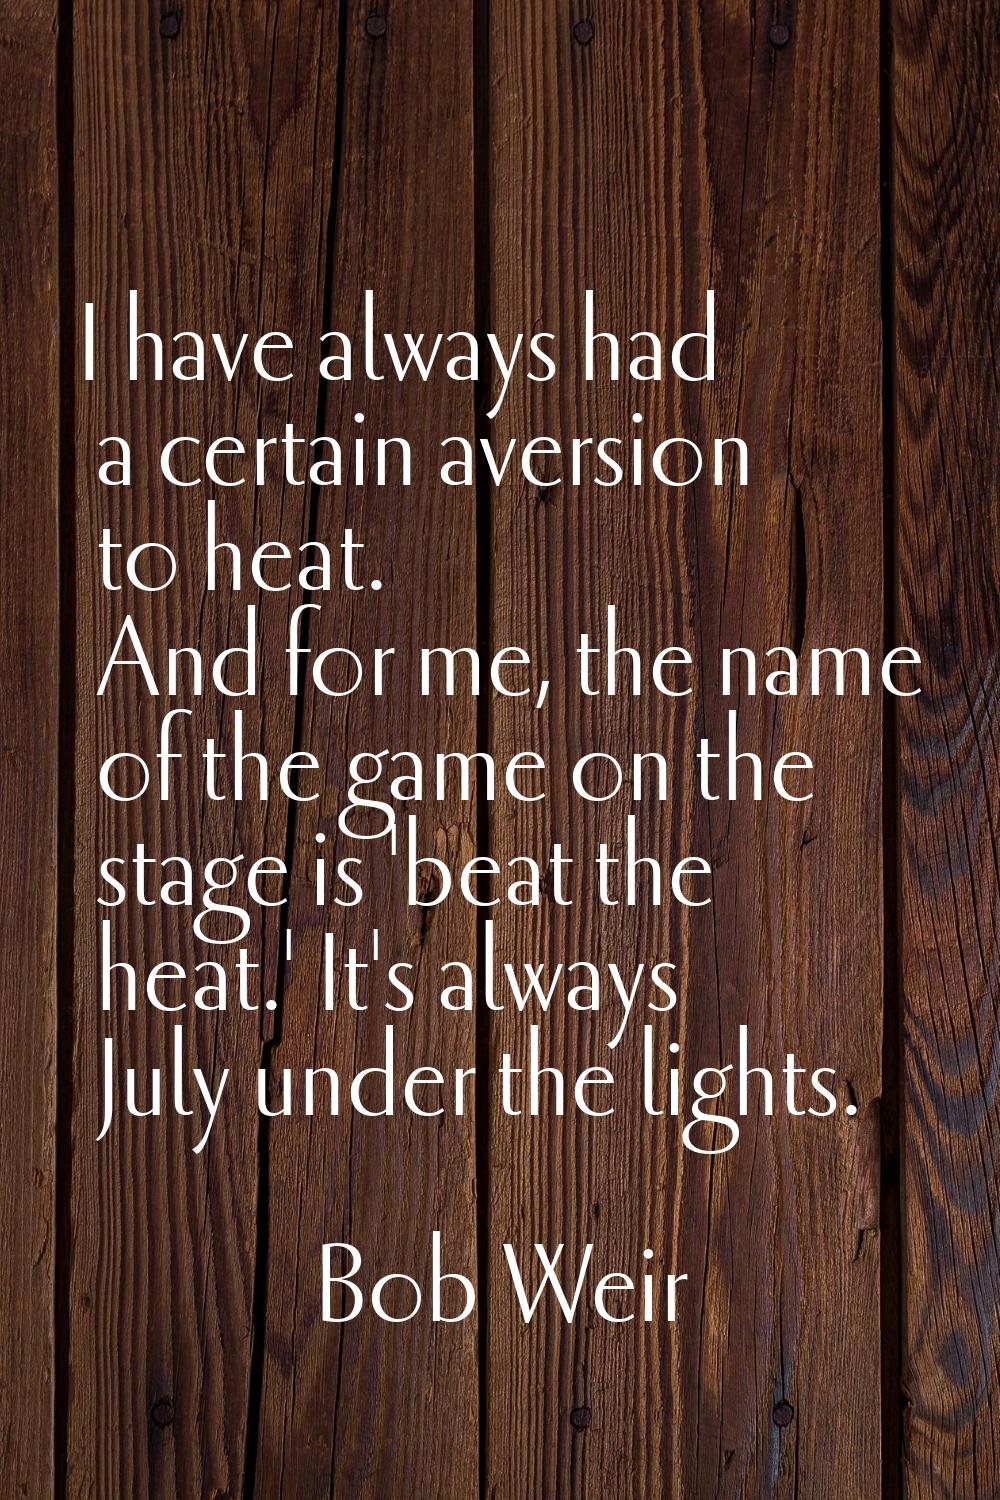 I have always had a certain aversion to heat. And for me, the name of the game on the stage is 'bea